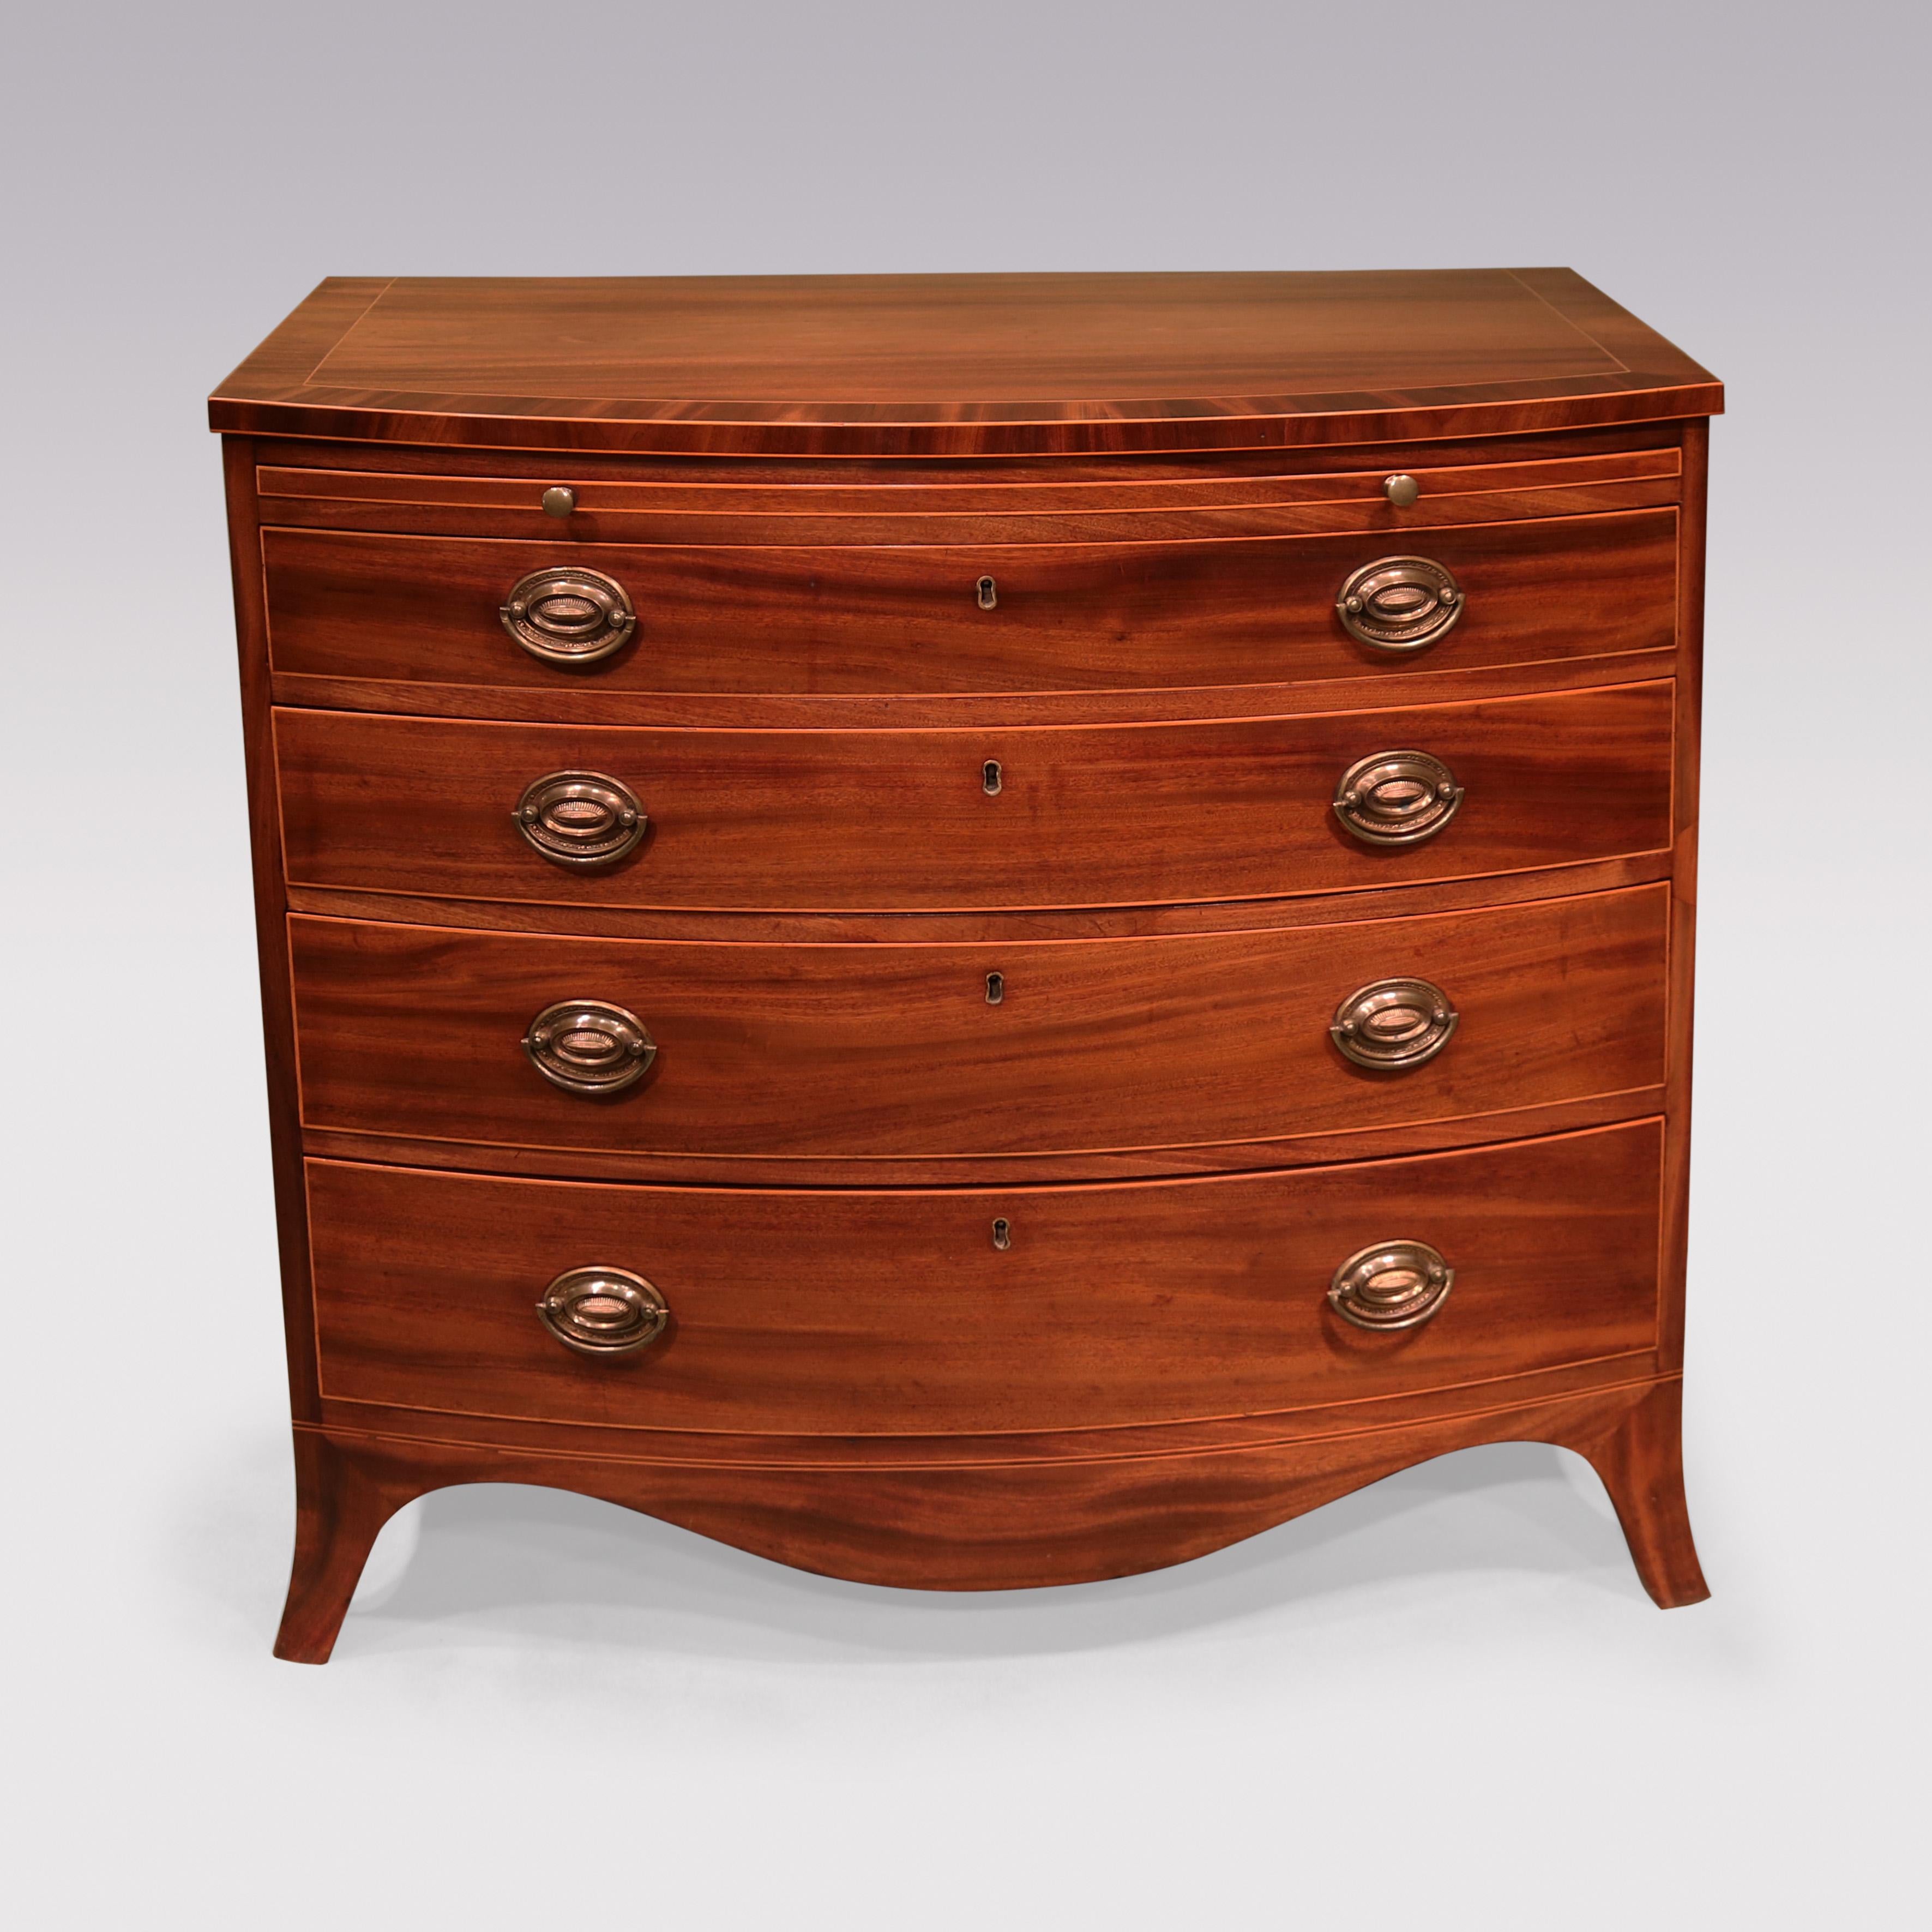 A fine quality early 19th Century mahogany bowfront Chest, boxwood strung throughout, having crossbanded top above brushing slide & four graduated drawers retaining original handles supported on splay bracket feet with shaped apron.